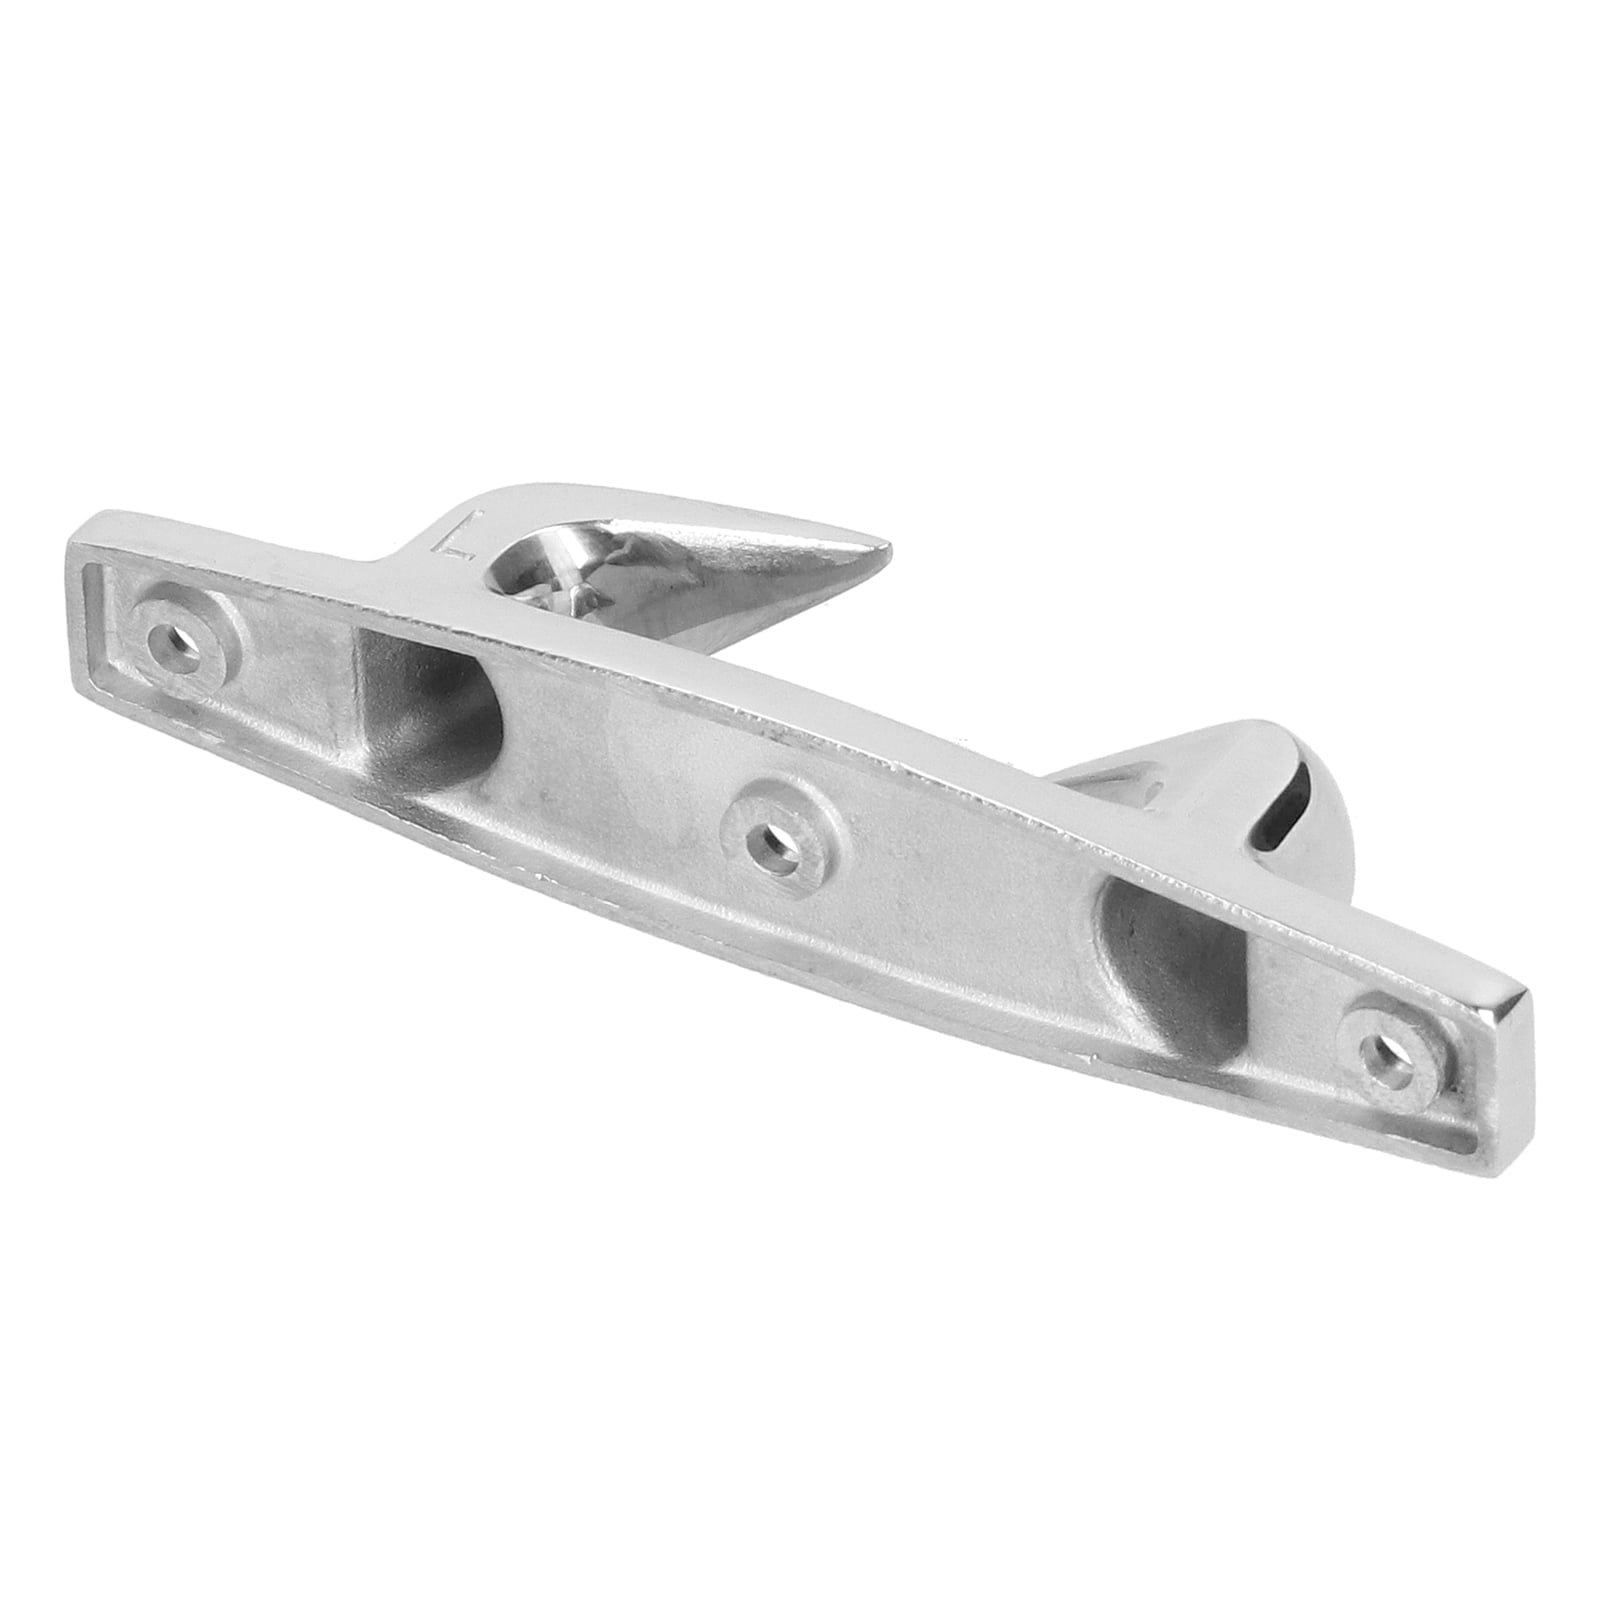 Deror Boat Cleat 2pcs 4.69in Anchoring Mooring Cleats Left Right 316 Stainless Steel Fairlead for Marine Boat Yacht 